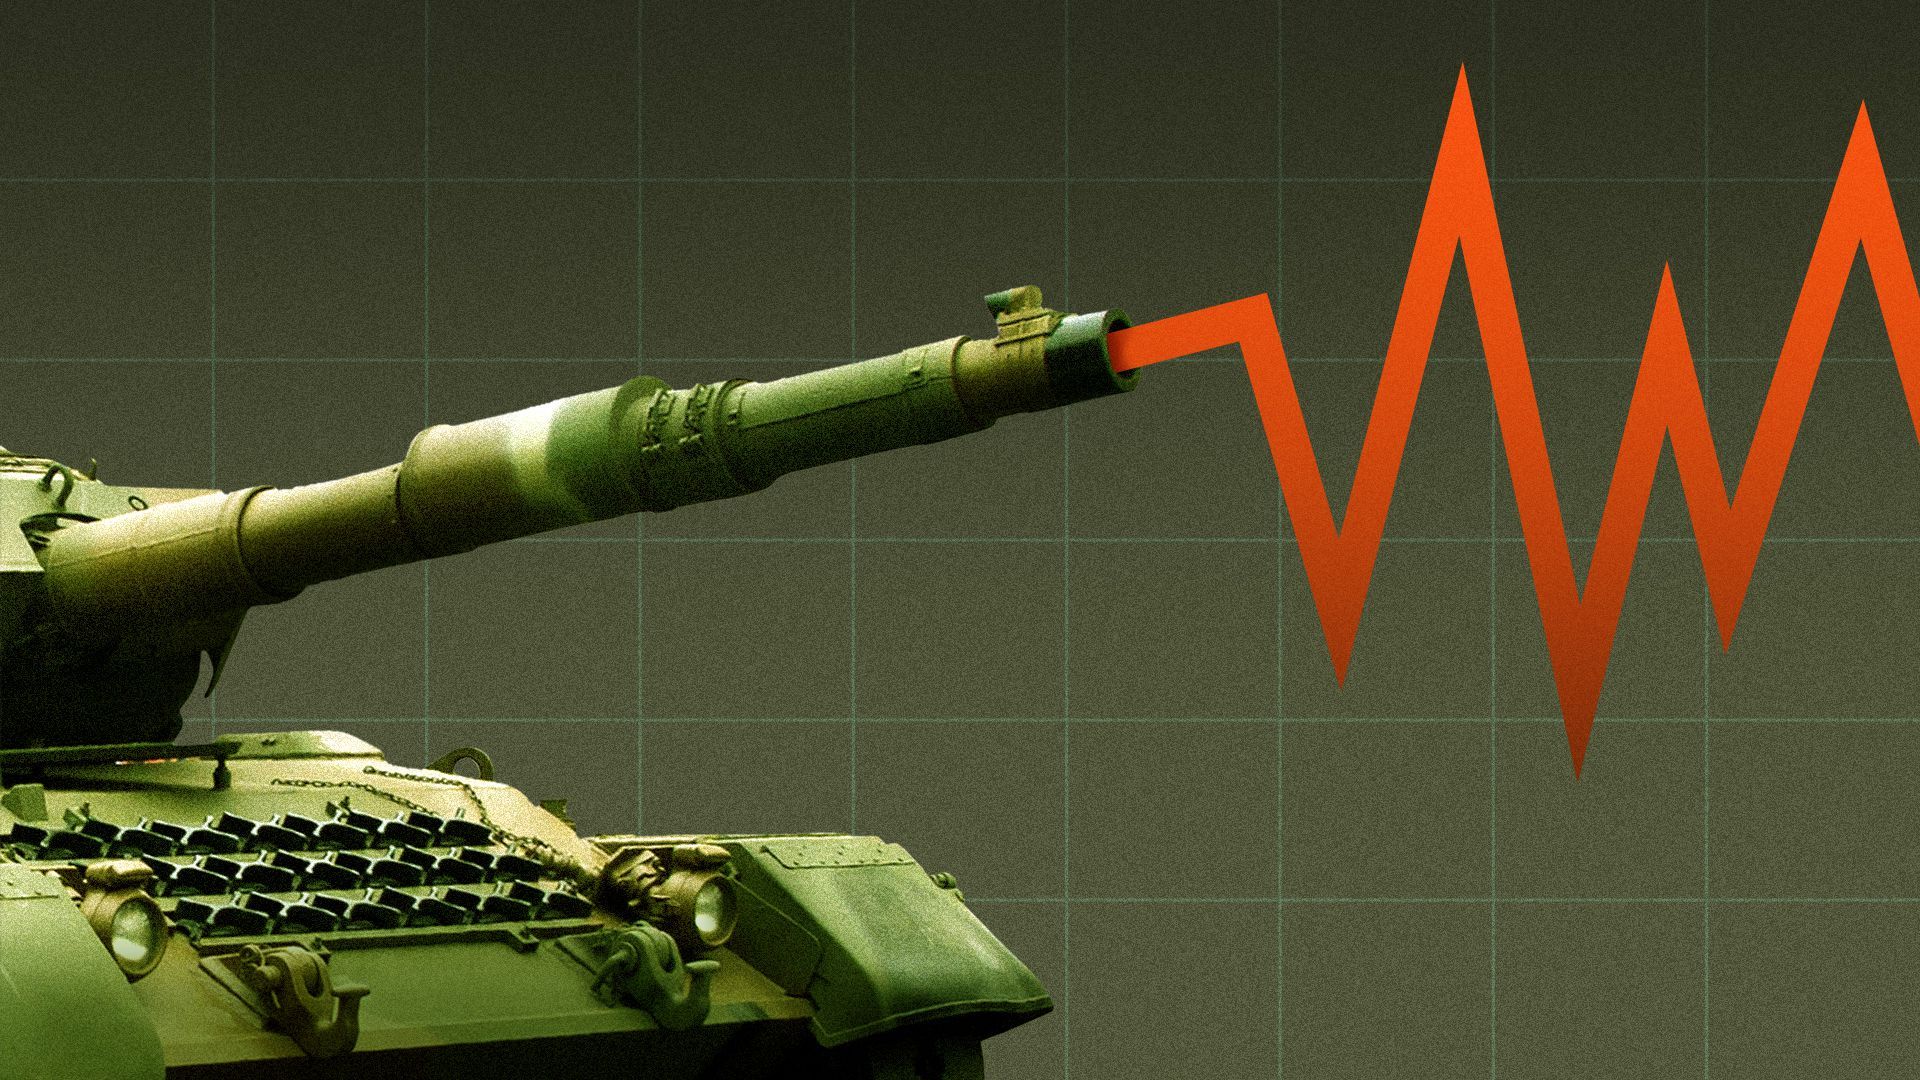 Illustration of a tank with an erratic line chart shooting out.